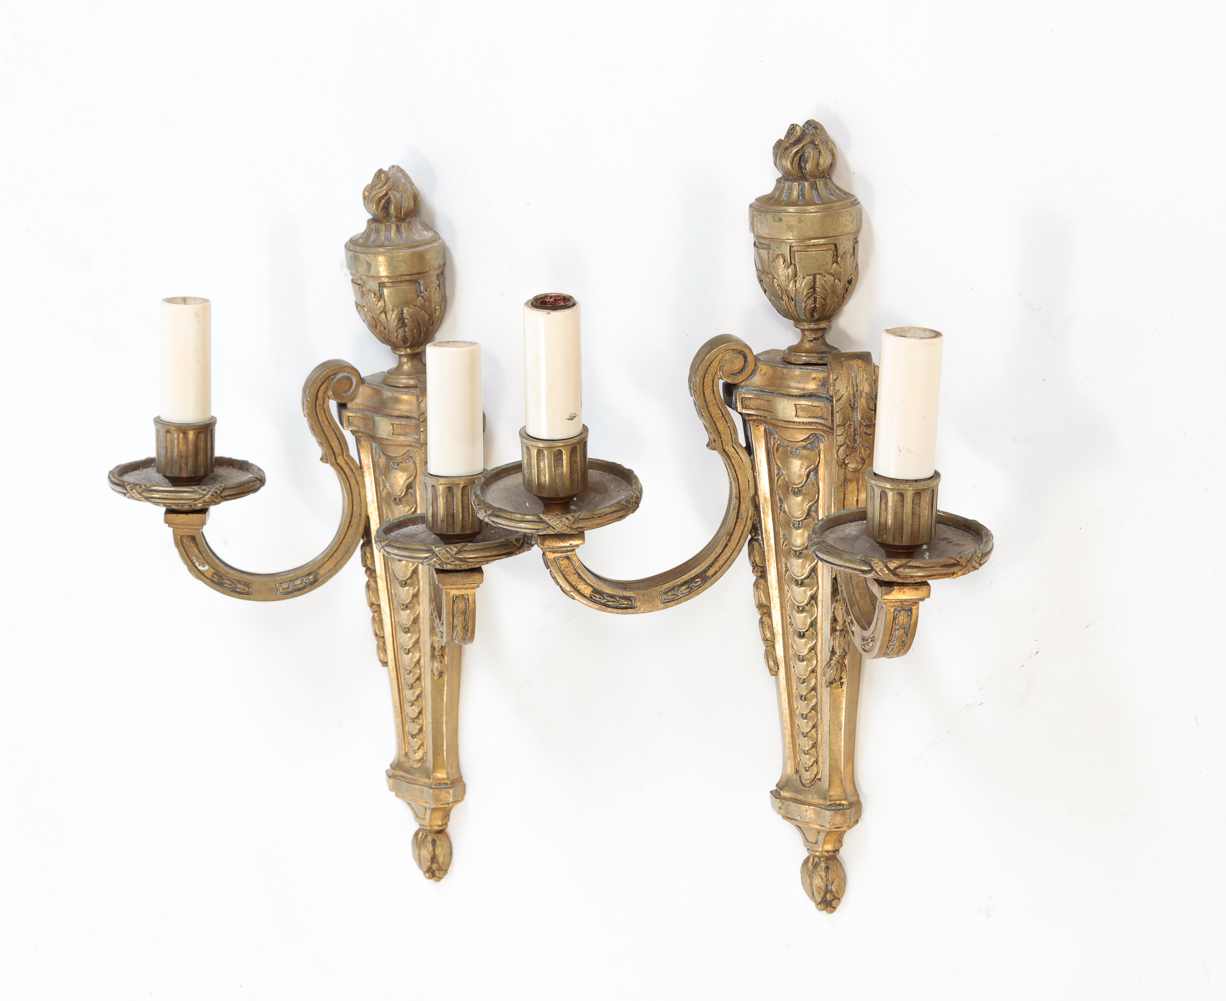 PAIR OF AMERICAN BRASS WALL SCONCES  2e014b